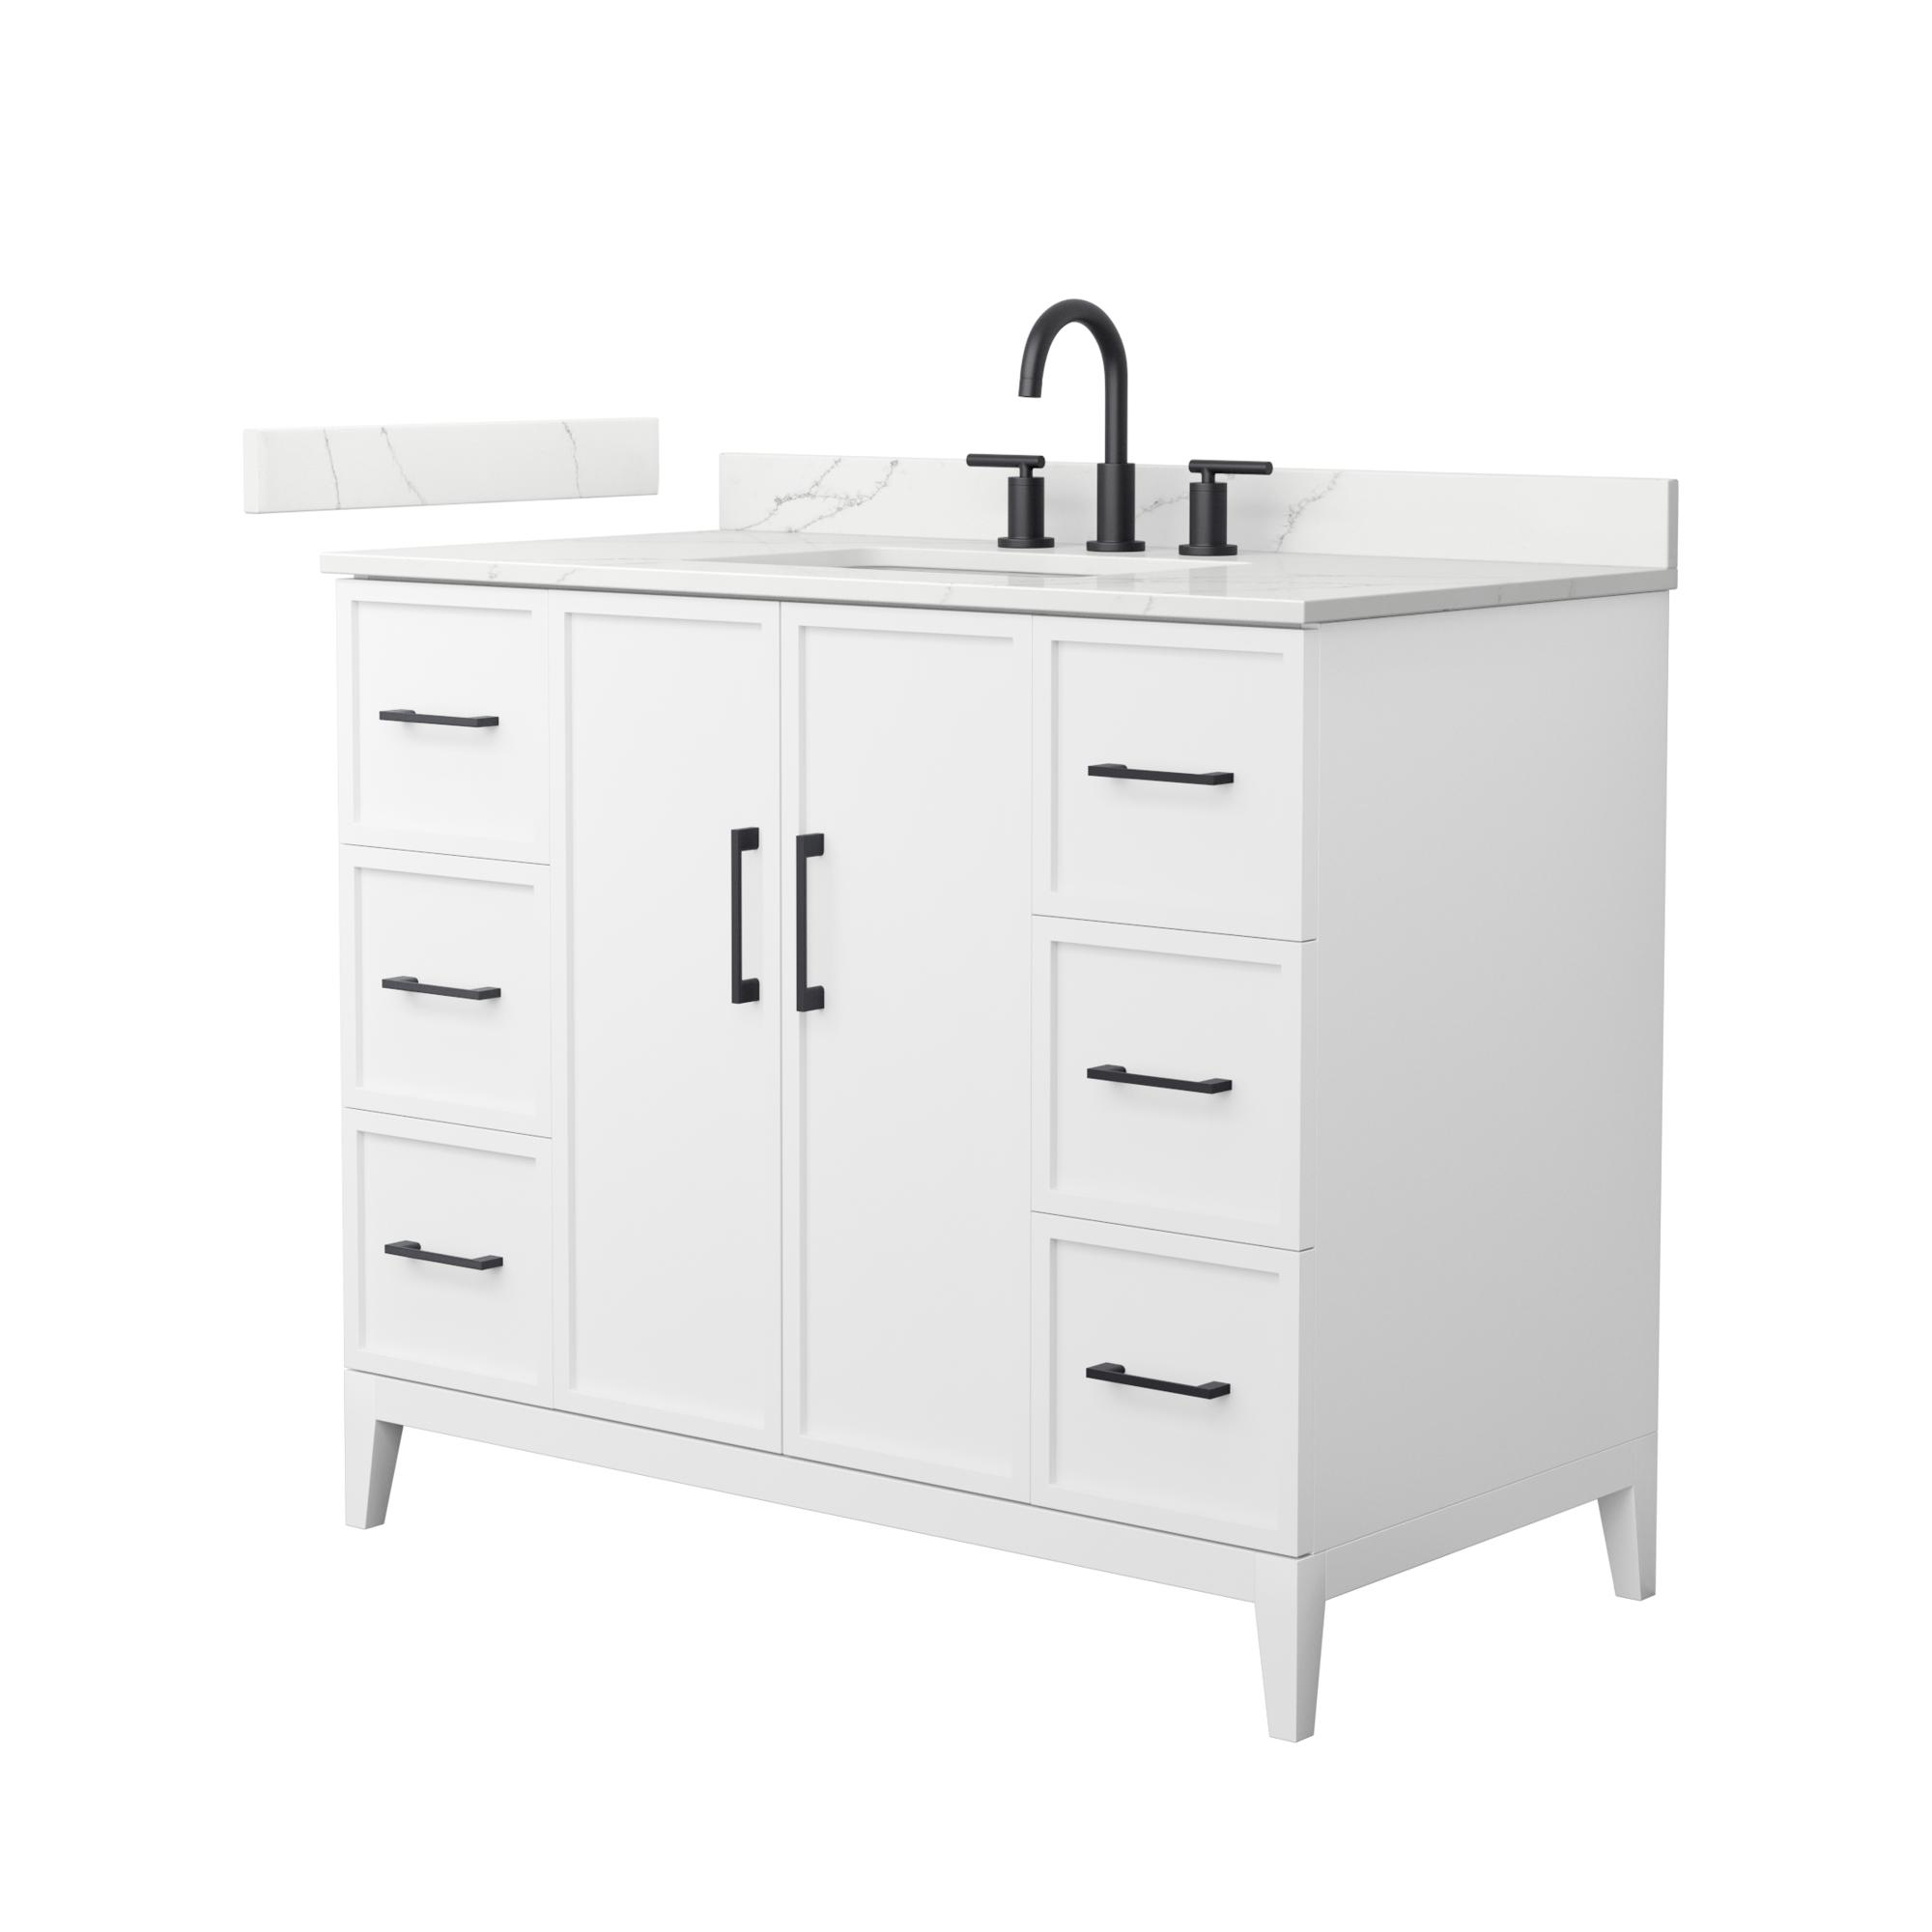 42" Transitional Single Vanity Base in White, 7 Top Options with 2 Hardware Option